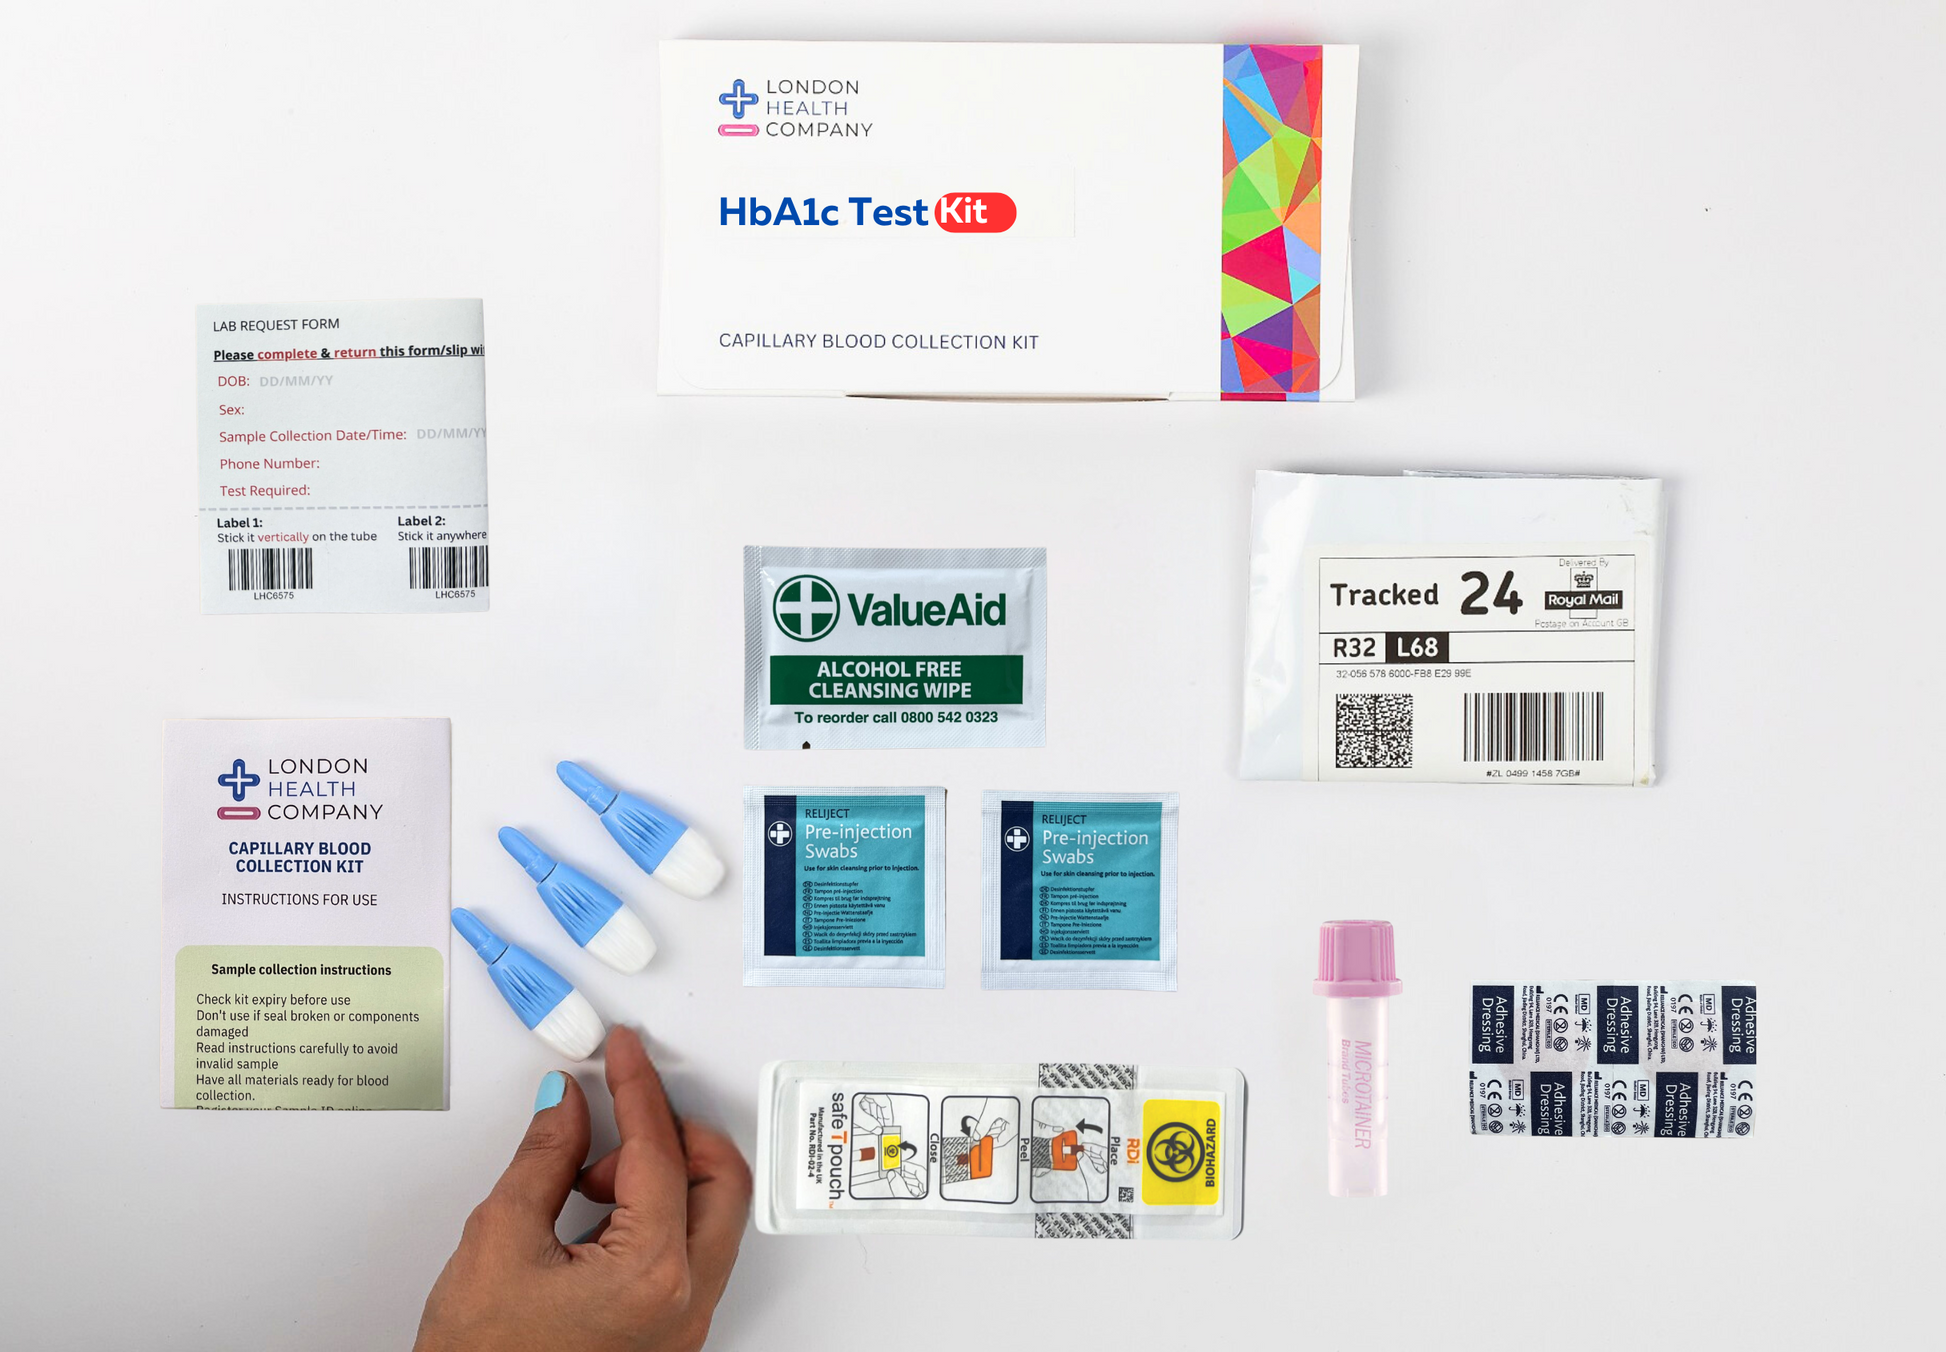 Complete blood collection kit components for HbA1c long-term diabetes including instructions, form, tube, pouch, tube holder, prepaid envelope, plasters, lancets, wipes, and swabs.